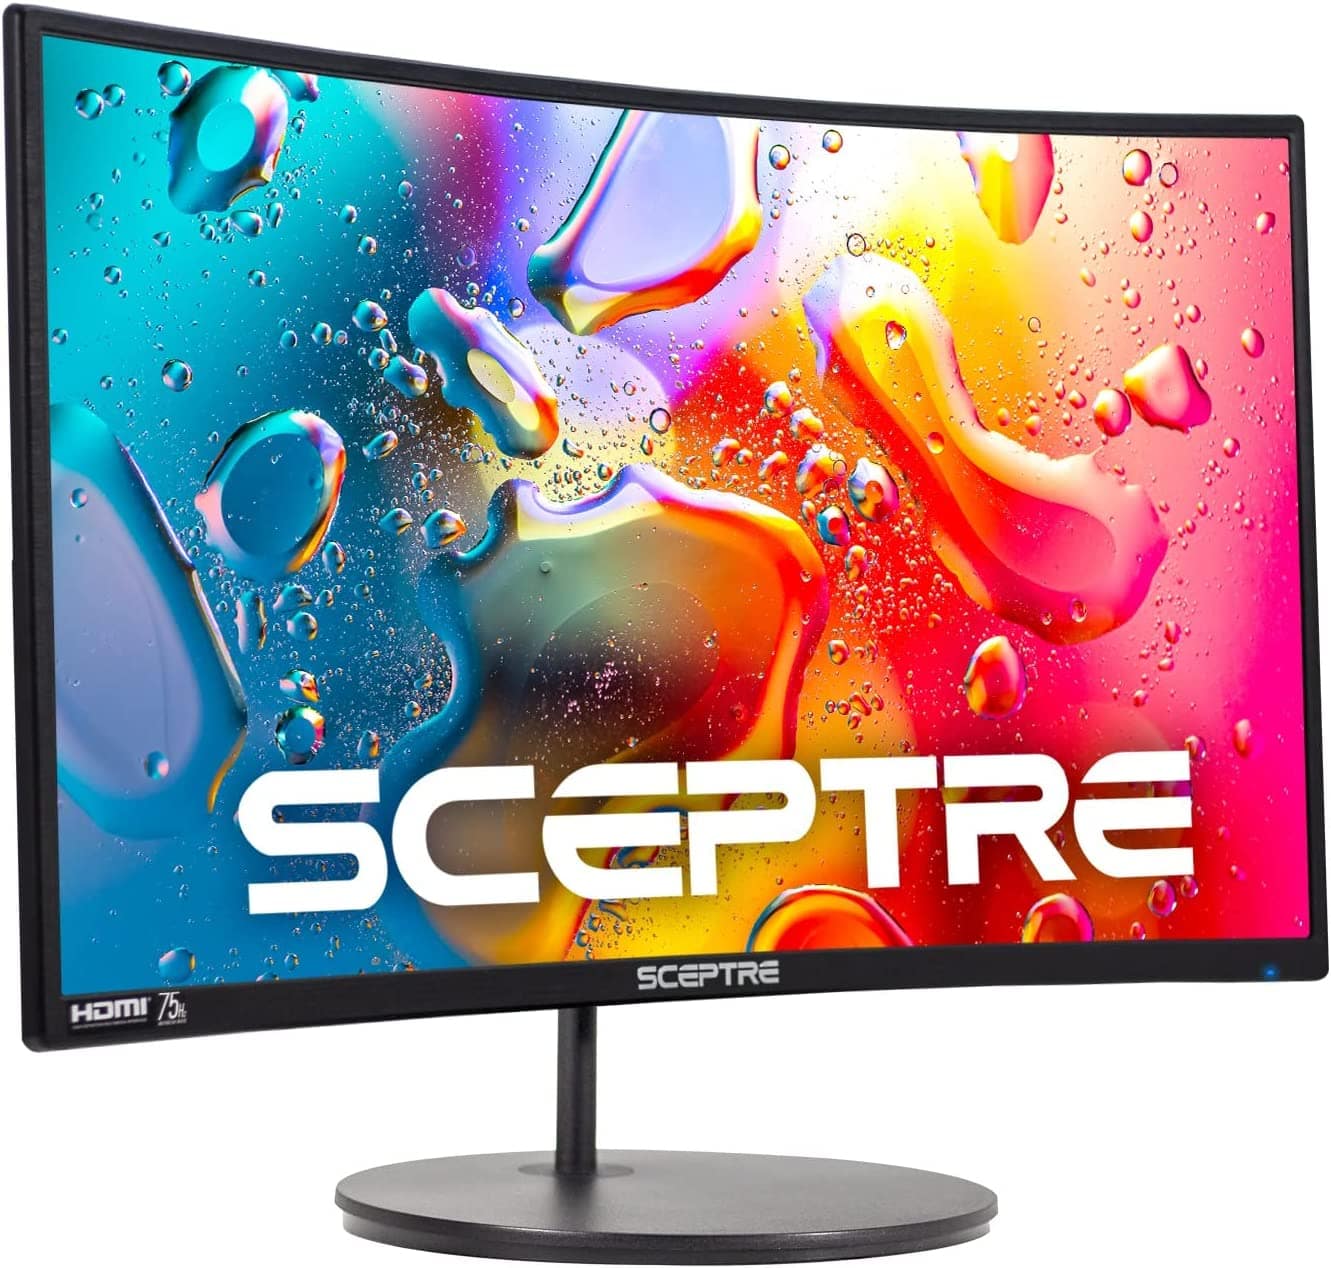 Curved 75Hz Gaming LED Monitor